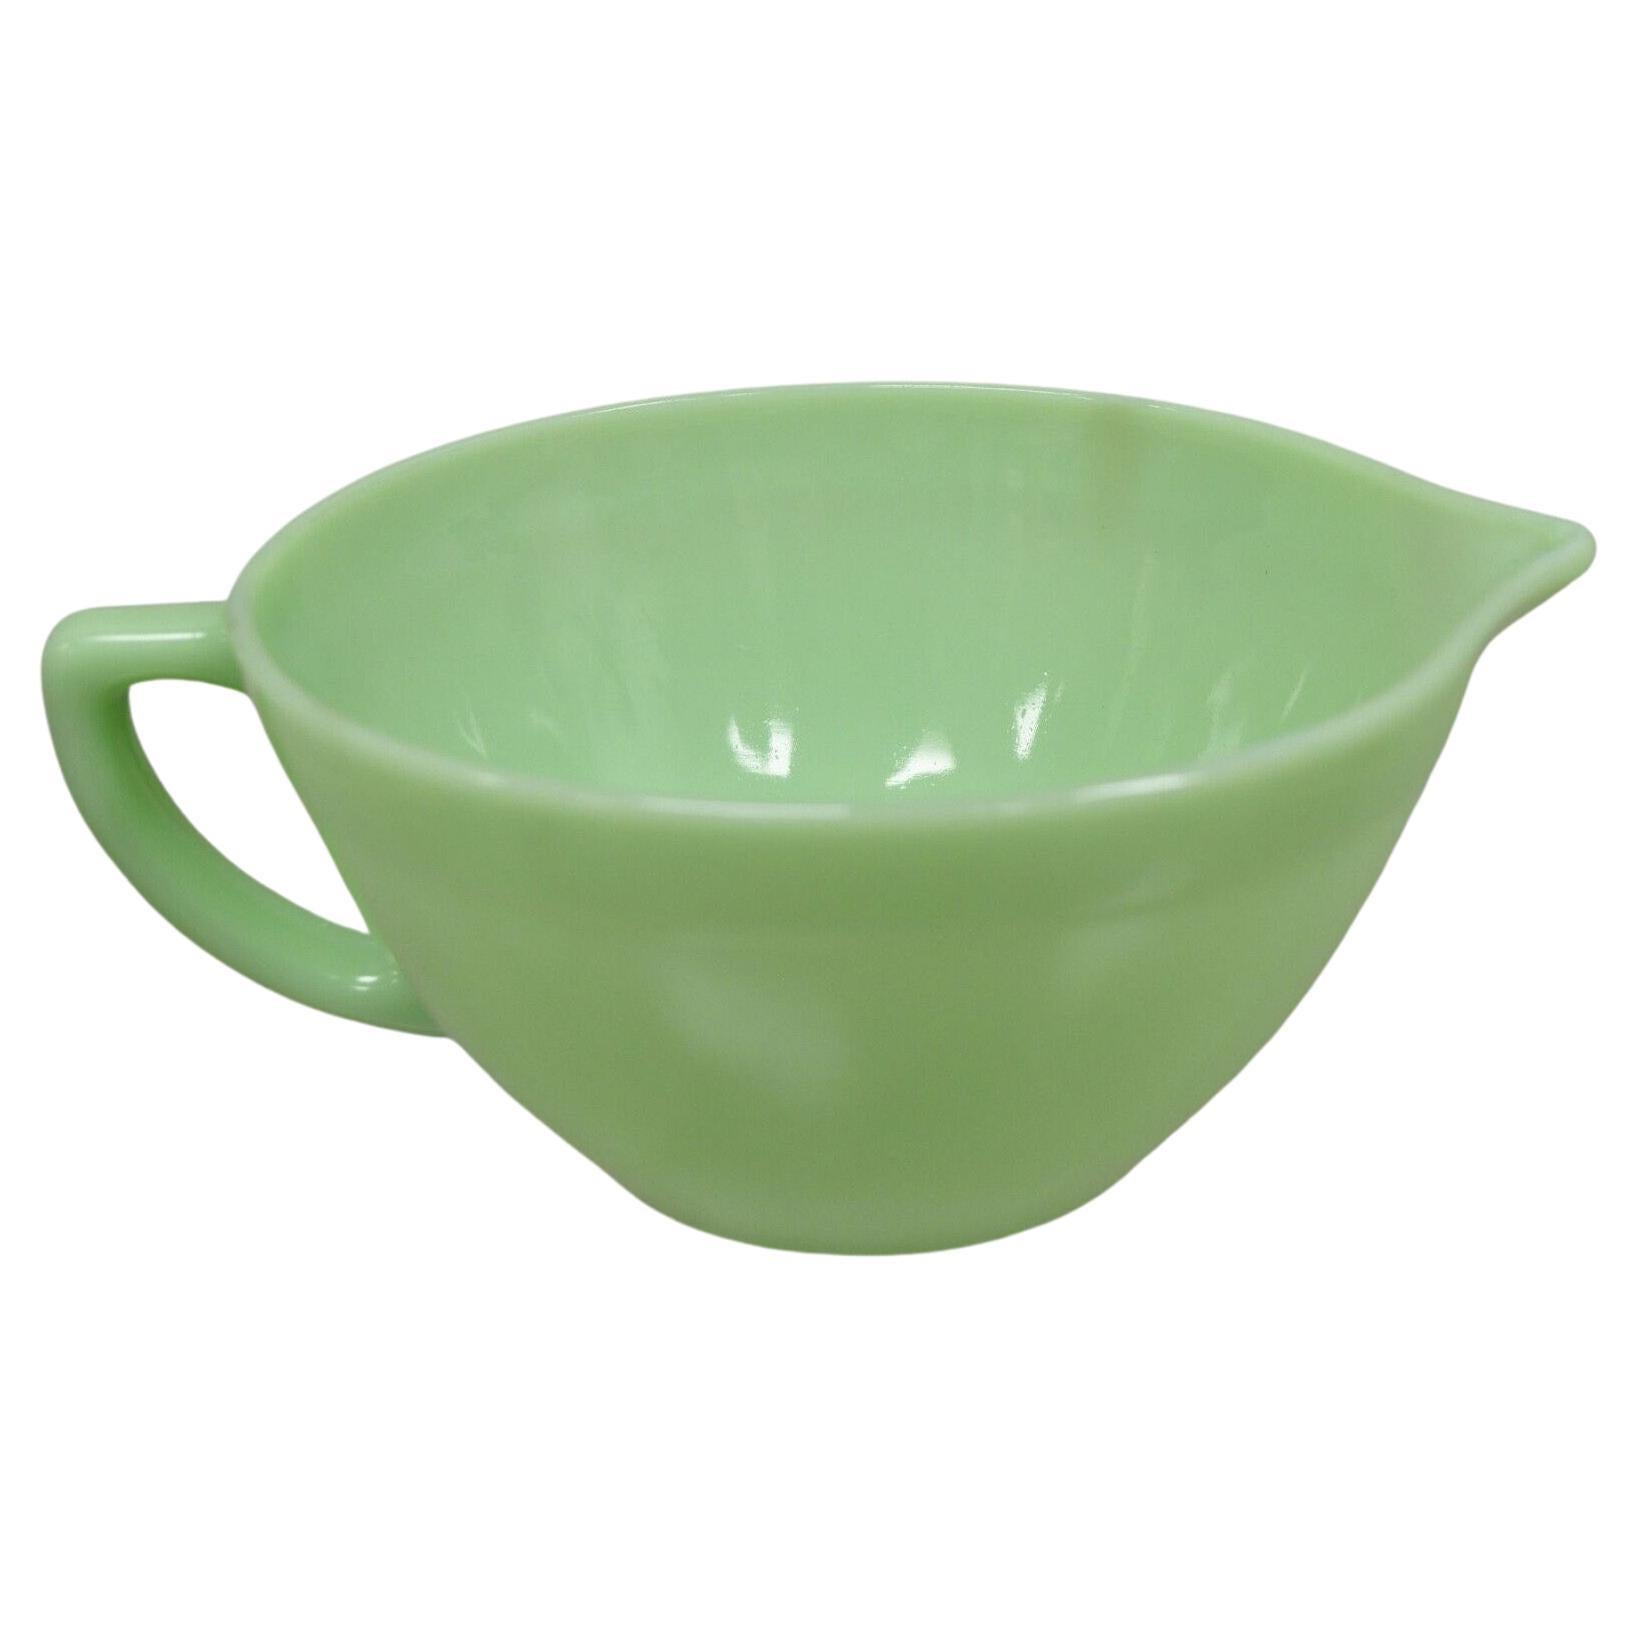 Vintage Fire King Oven Ware Jadeite Green Batter Bowl with Spout & Handle